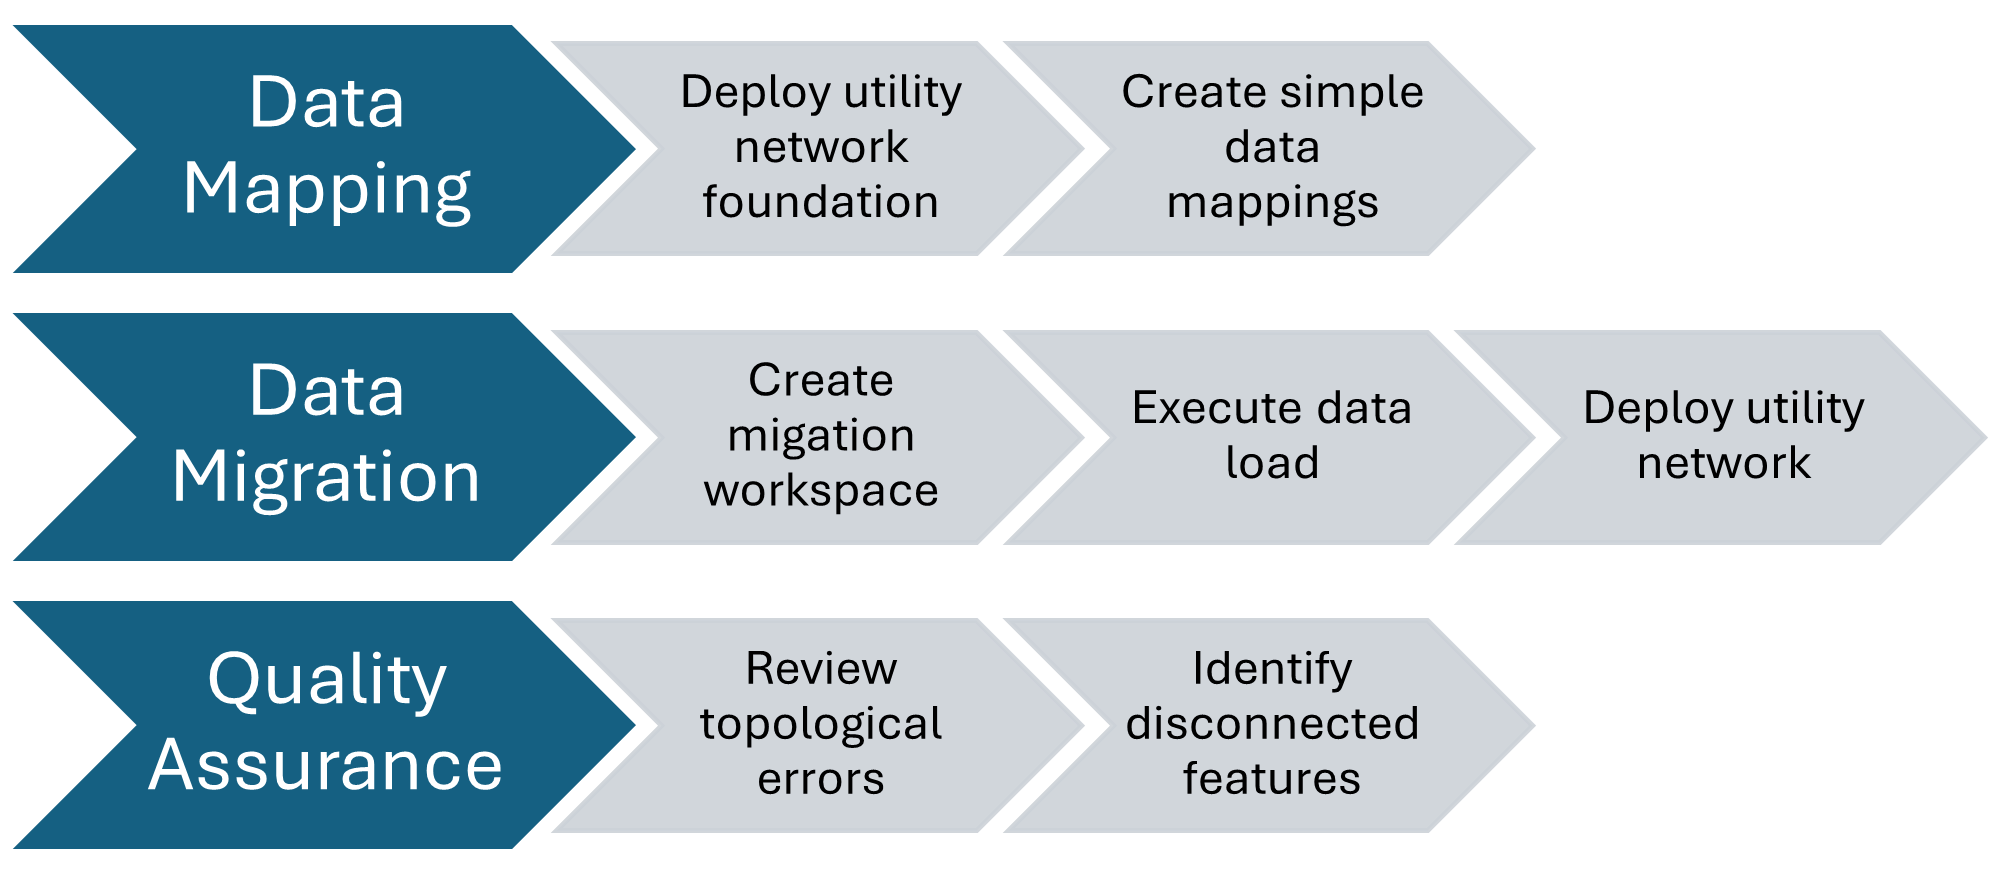 A diagram showing the three main steps for utility network data migration: data mapping, data migration, and quality assurance. The data mapping step requires you to deploy a utility network foundation and create simple data mappings. Data migration requires you to create a migration workspace, execute the data load, and deploy the utility network. Quality assurance requires you to review topological errors and identify disconnected features.